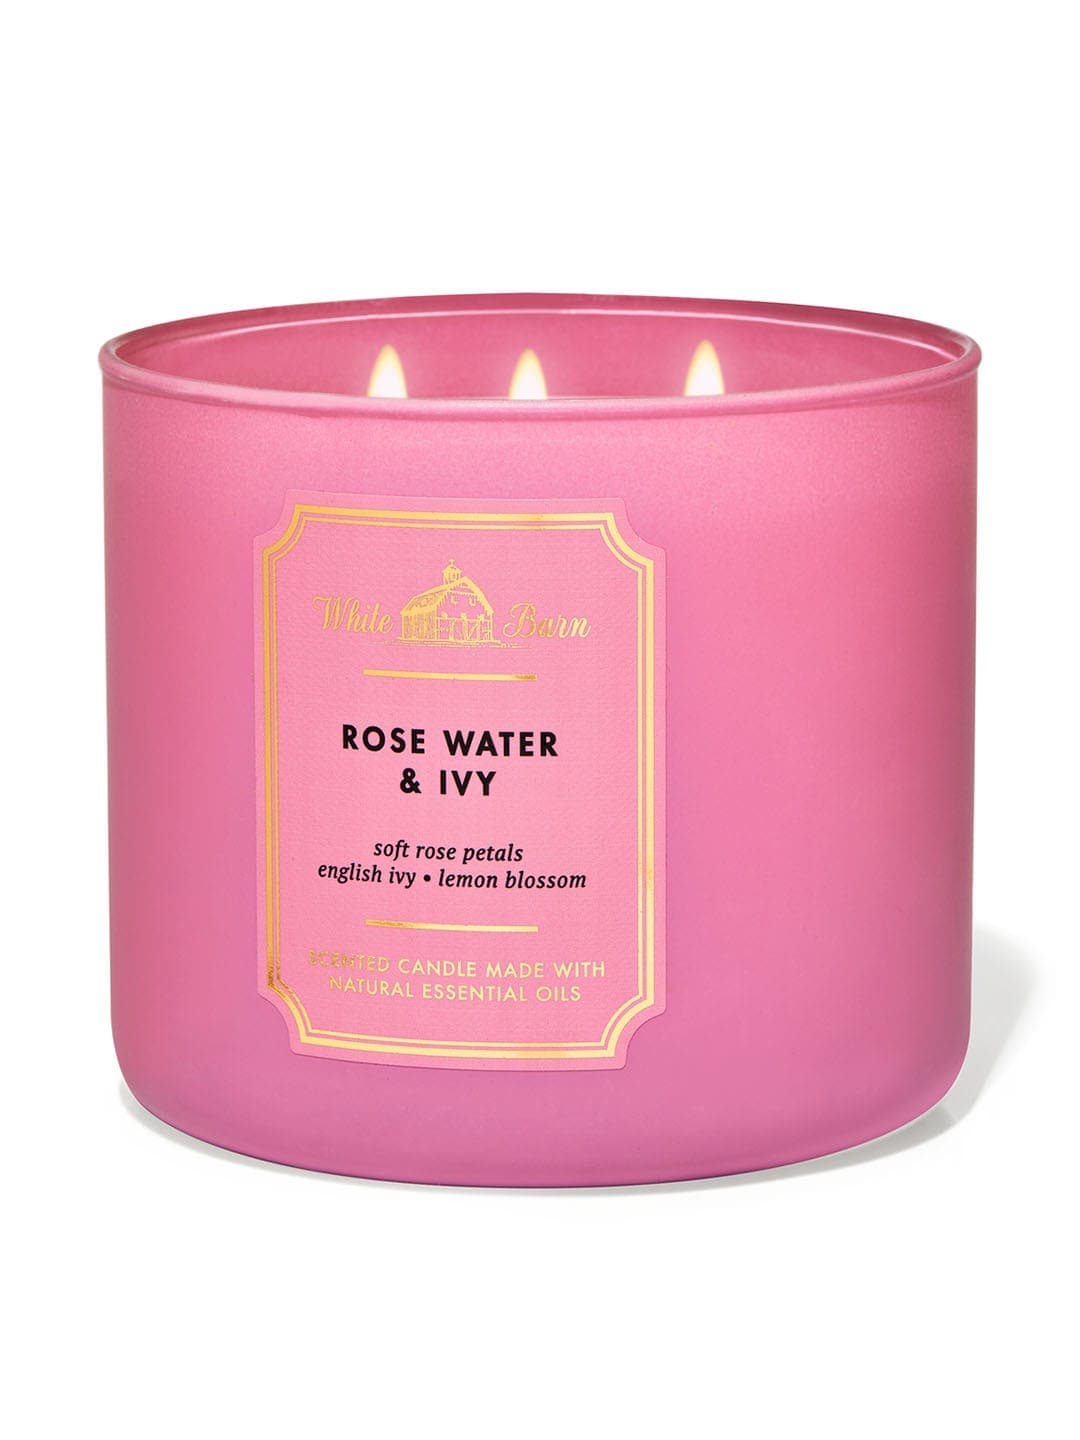 Bath & Body Works Rose Water & Ivy 3-Wick Scented Candle - 411g Price in India